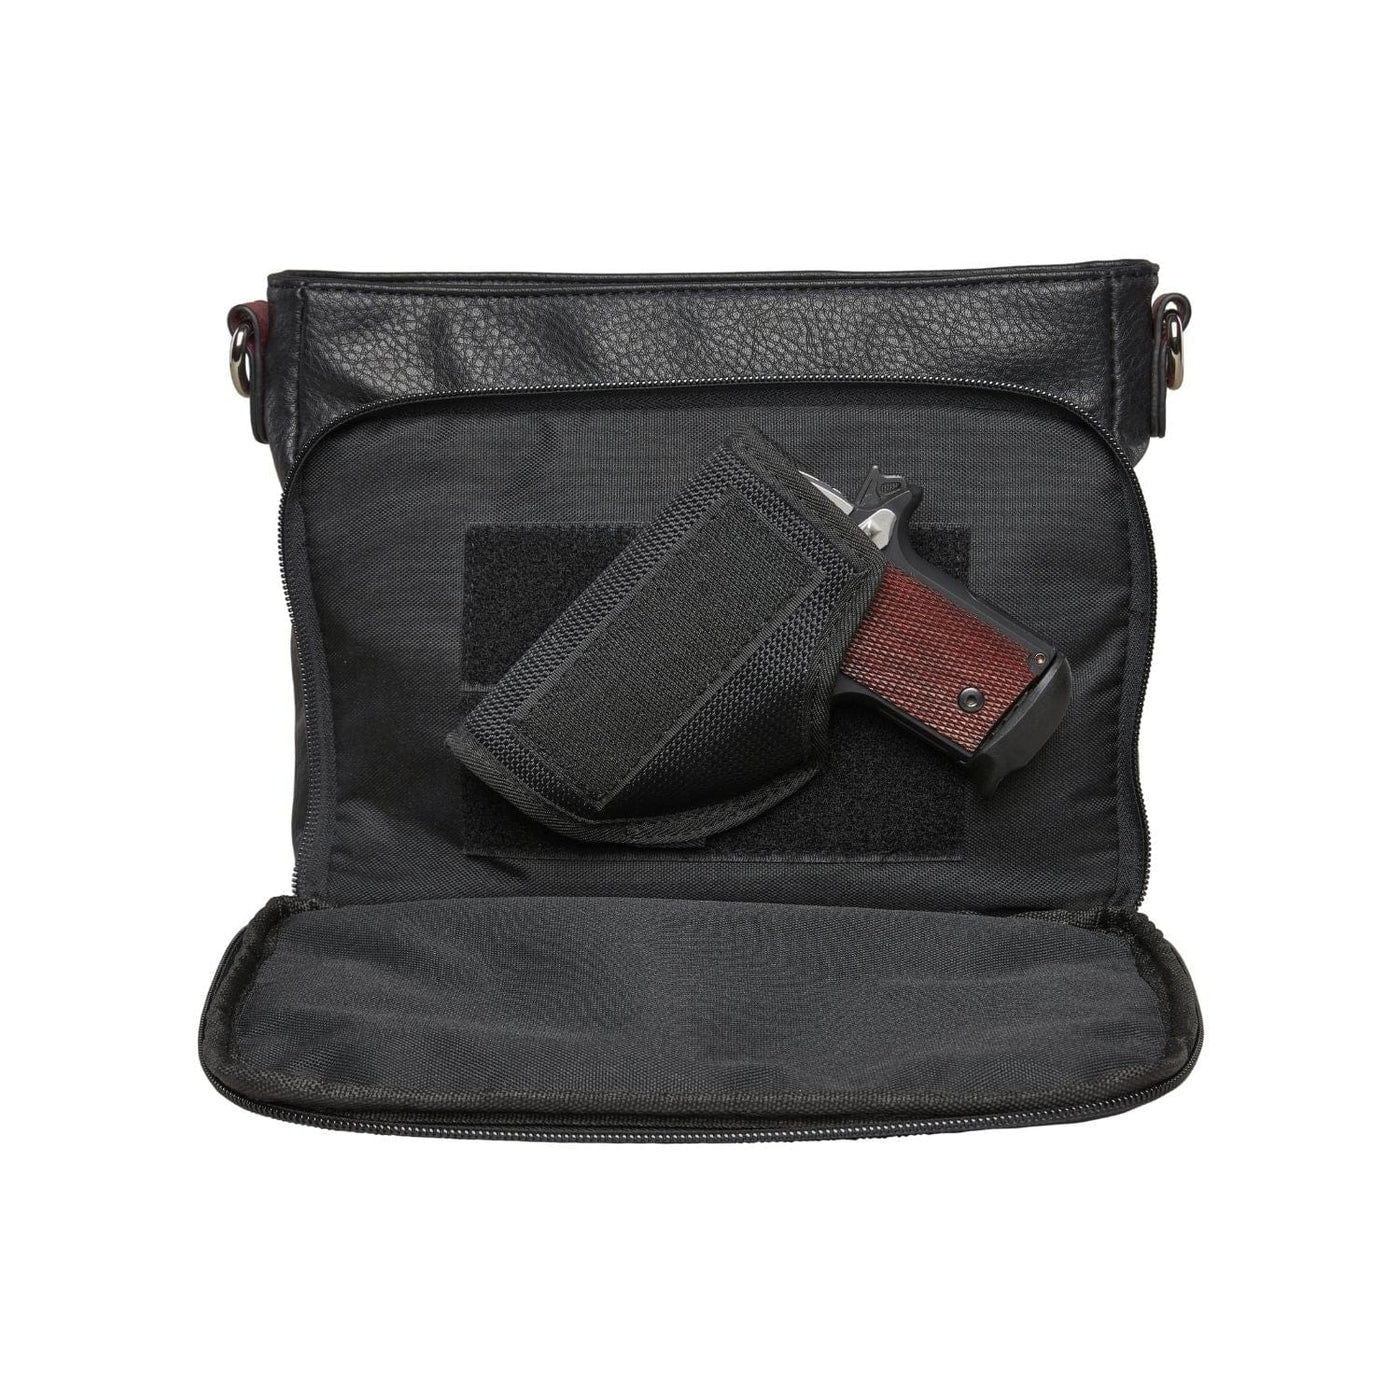 Lady Conceal Concealed Carry Purse Black Concealed Carry Stitched Skylar Crossbody Organizer